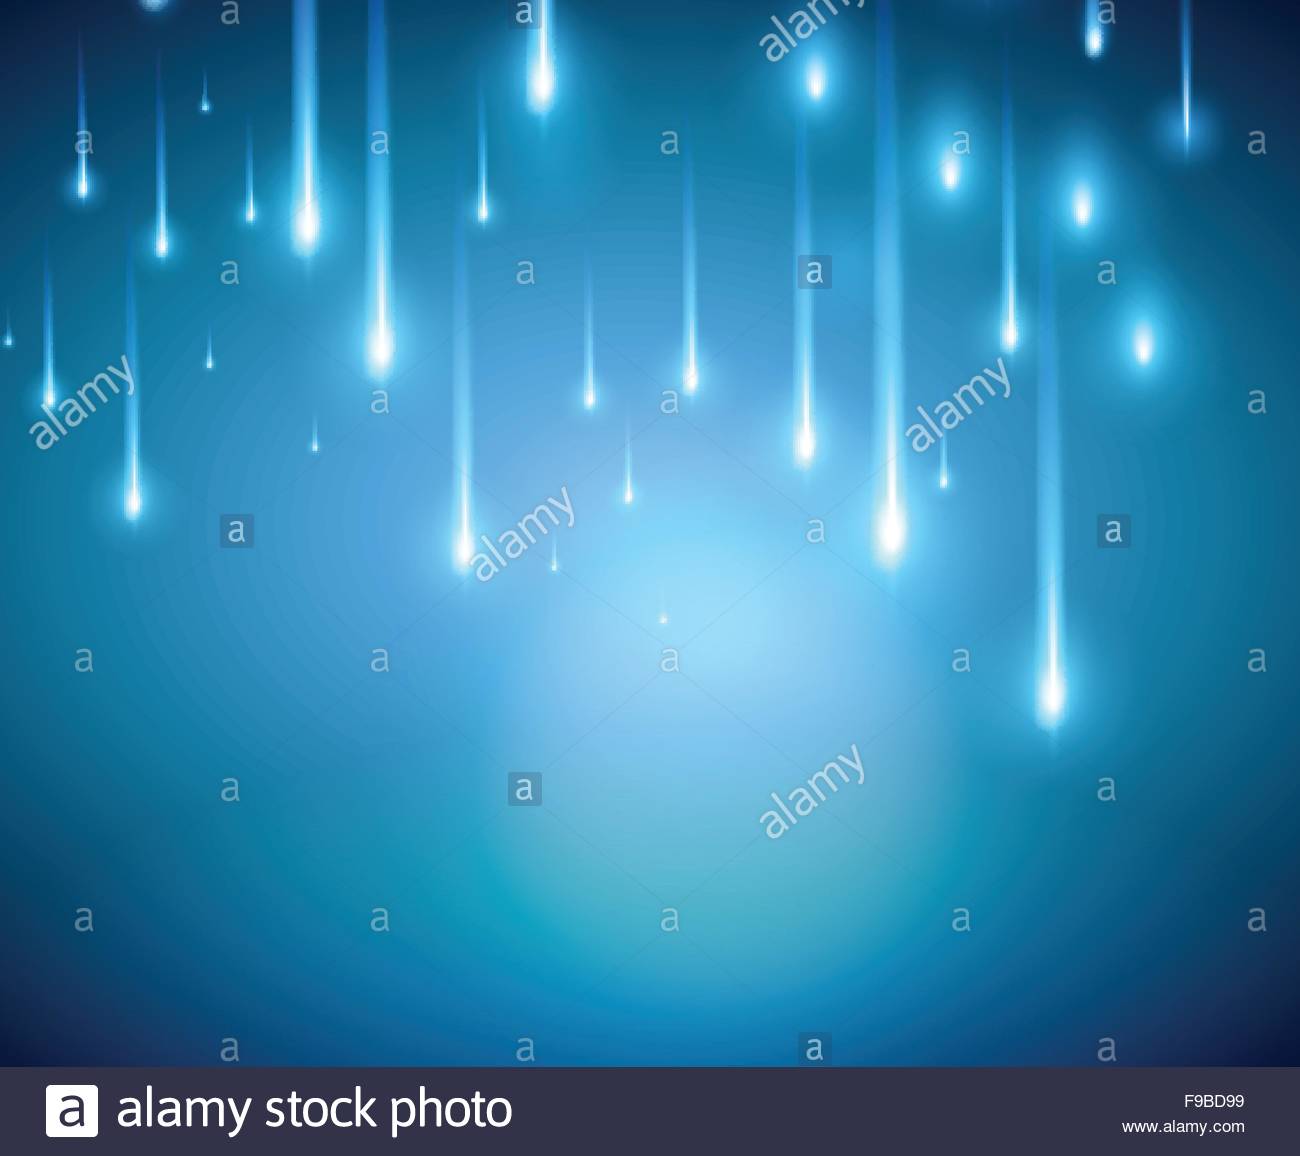 Blue Light And Blurred Halation Colored Shooting Star Background